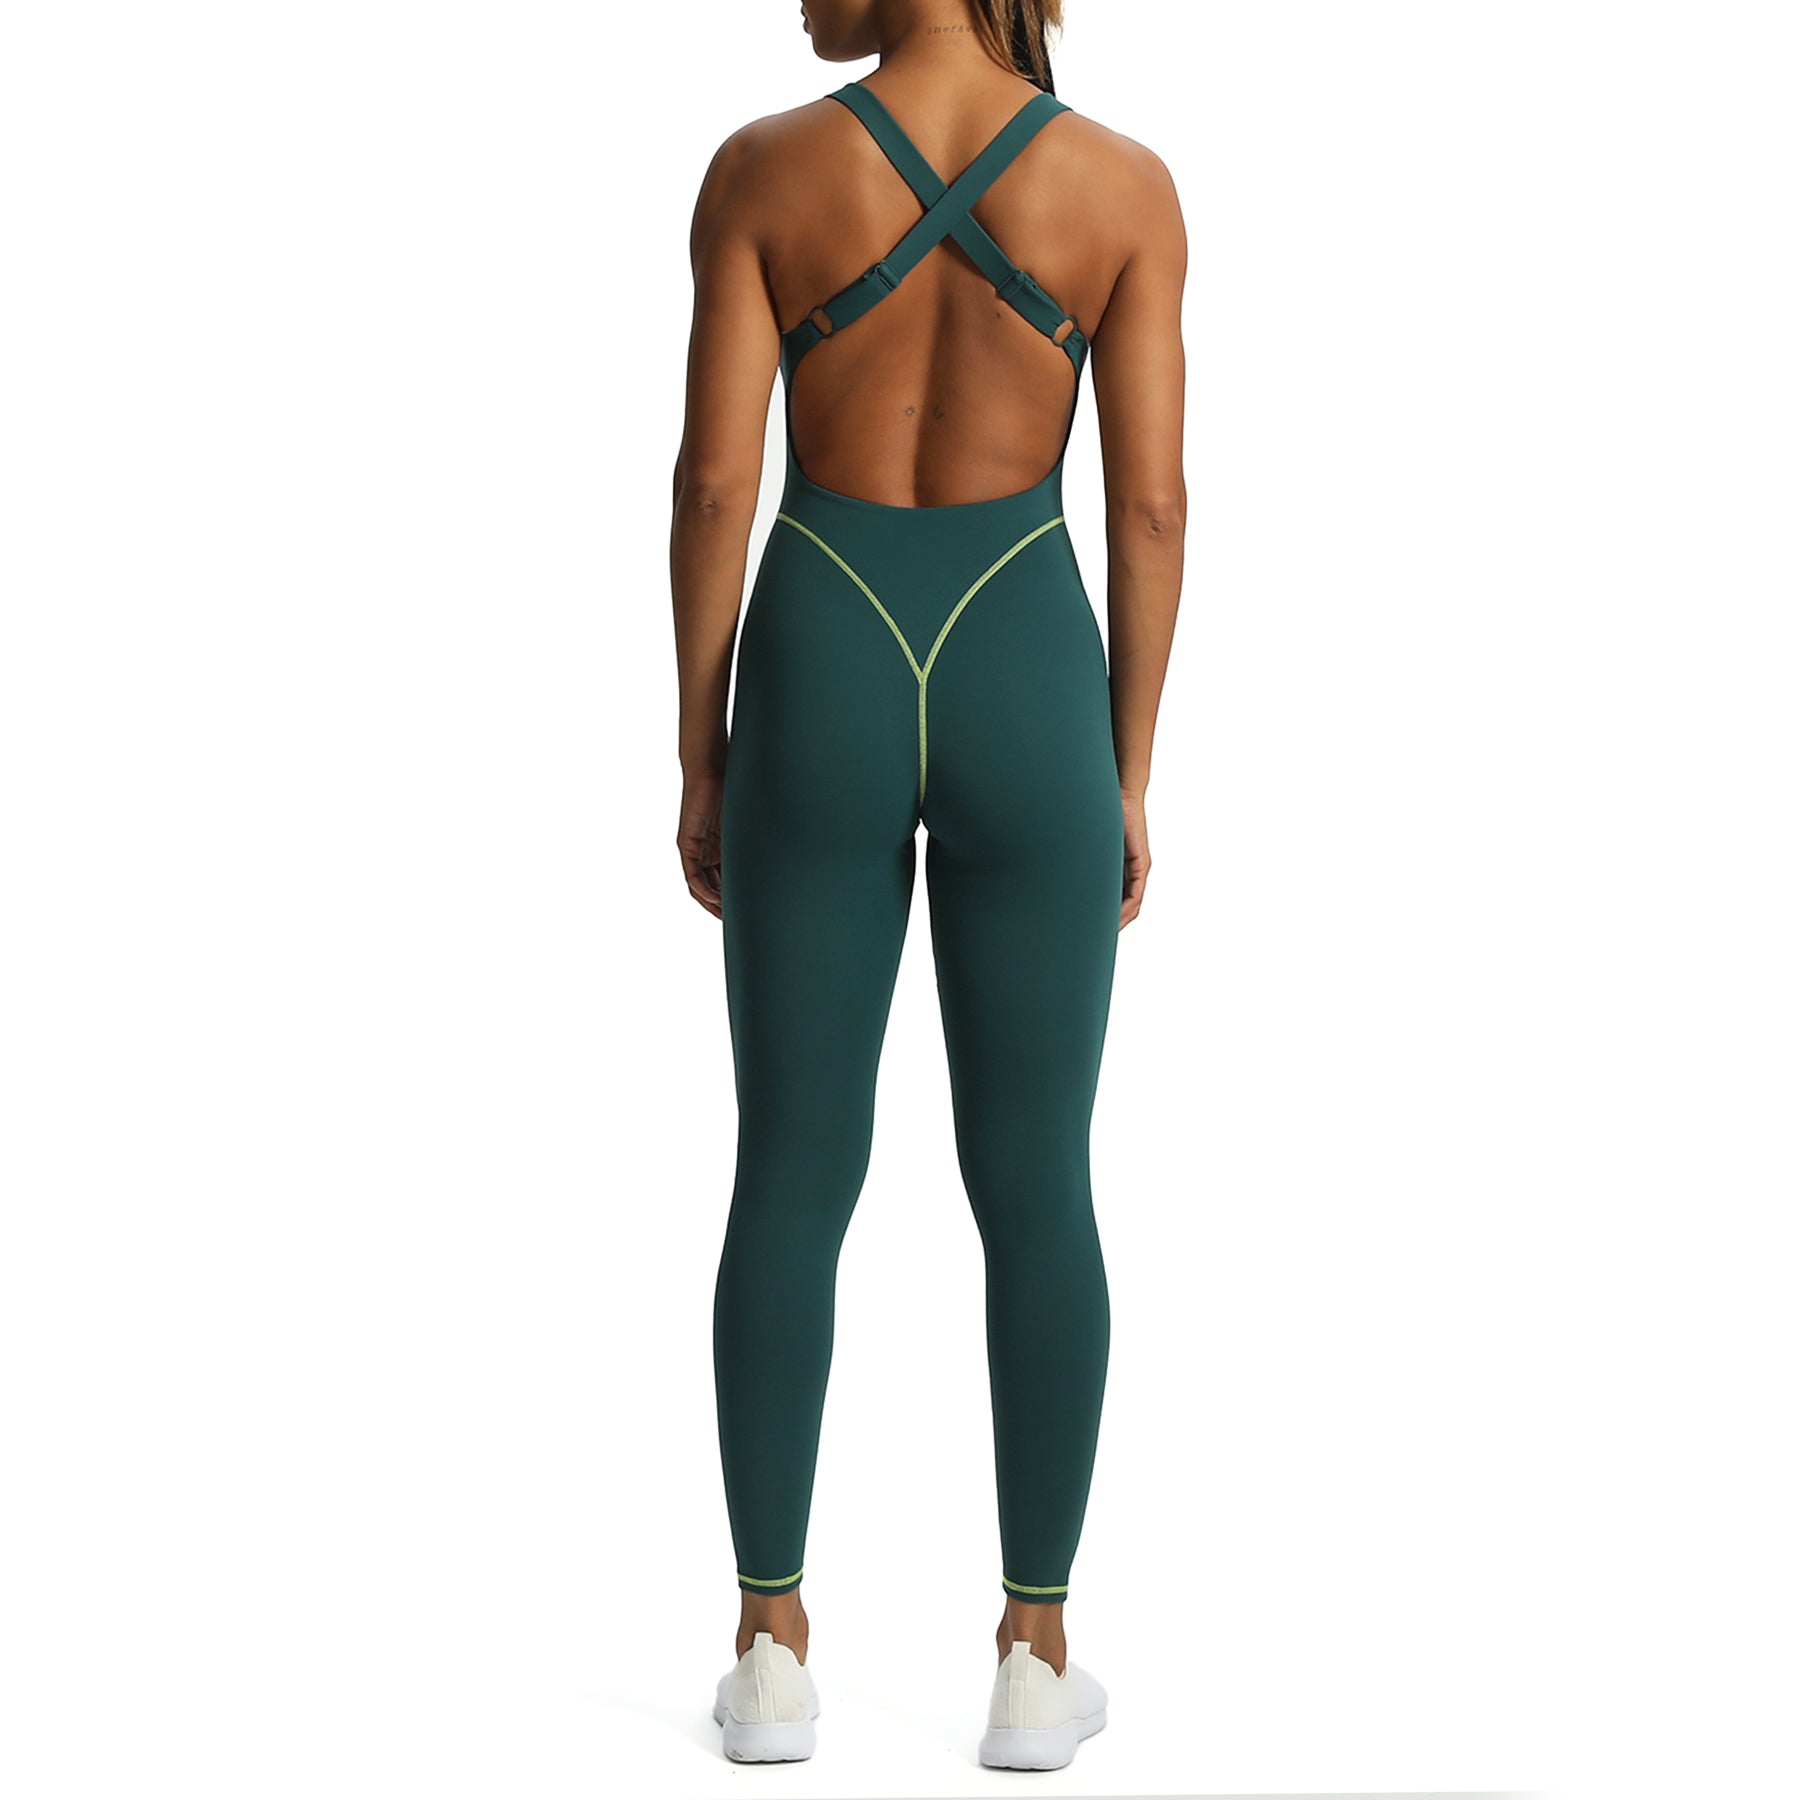 Aoxjox "Lexi Lined" Adjustable Full Bodysuit